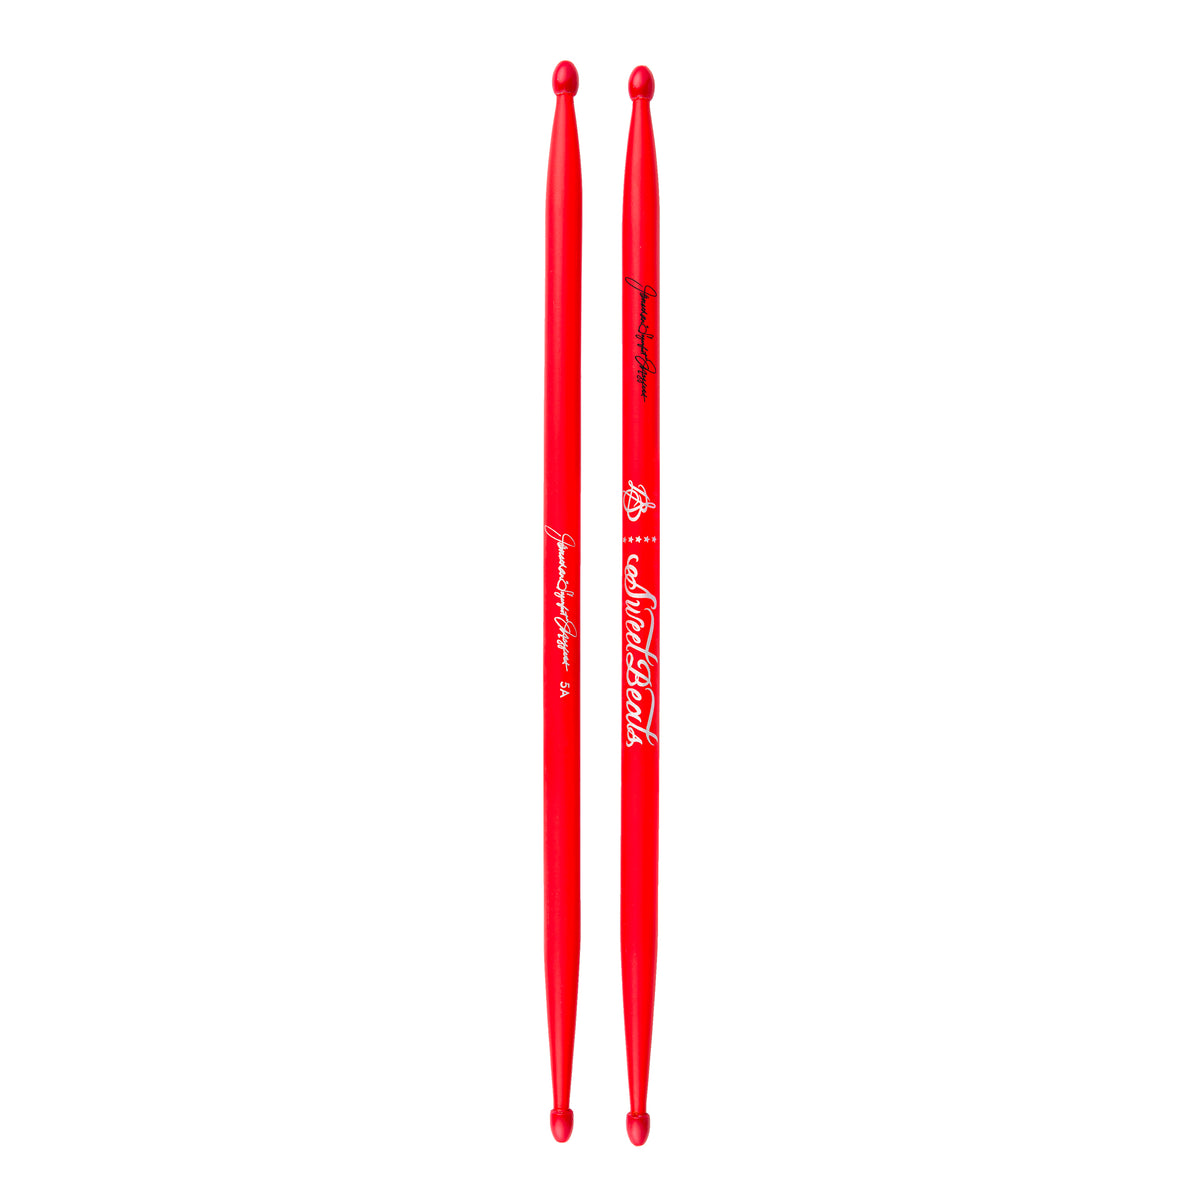 Hand Signed SweetBeats Drum Sticks - Cherry Matte | Red Nylon Tips Collectible